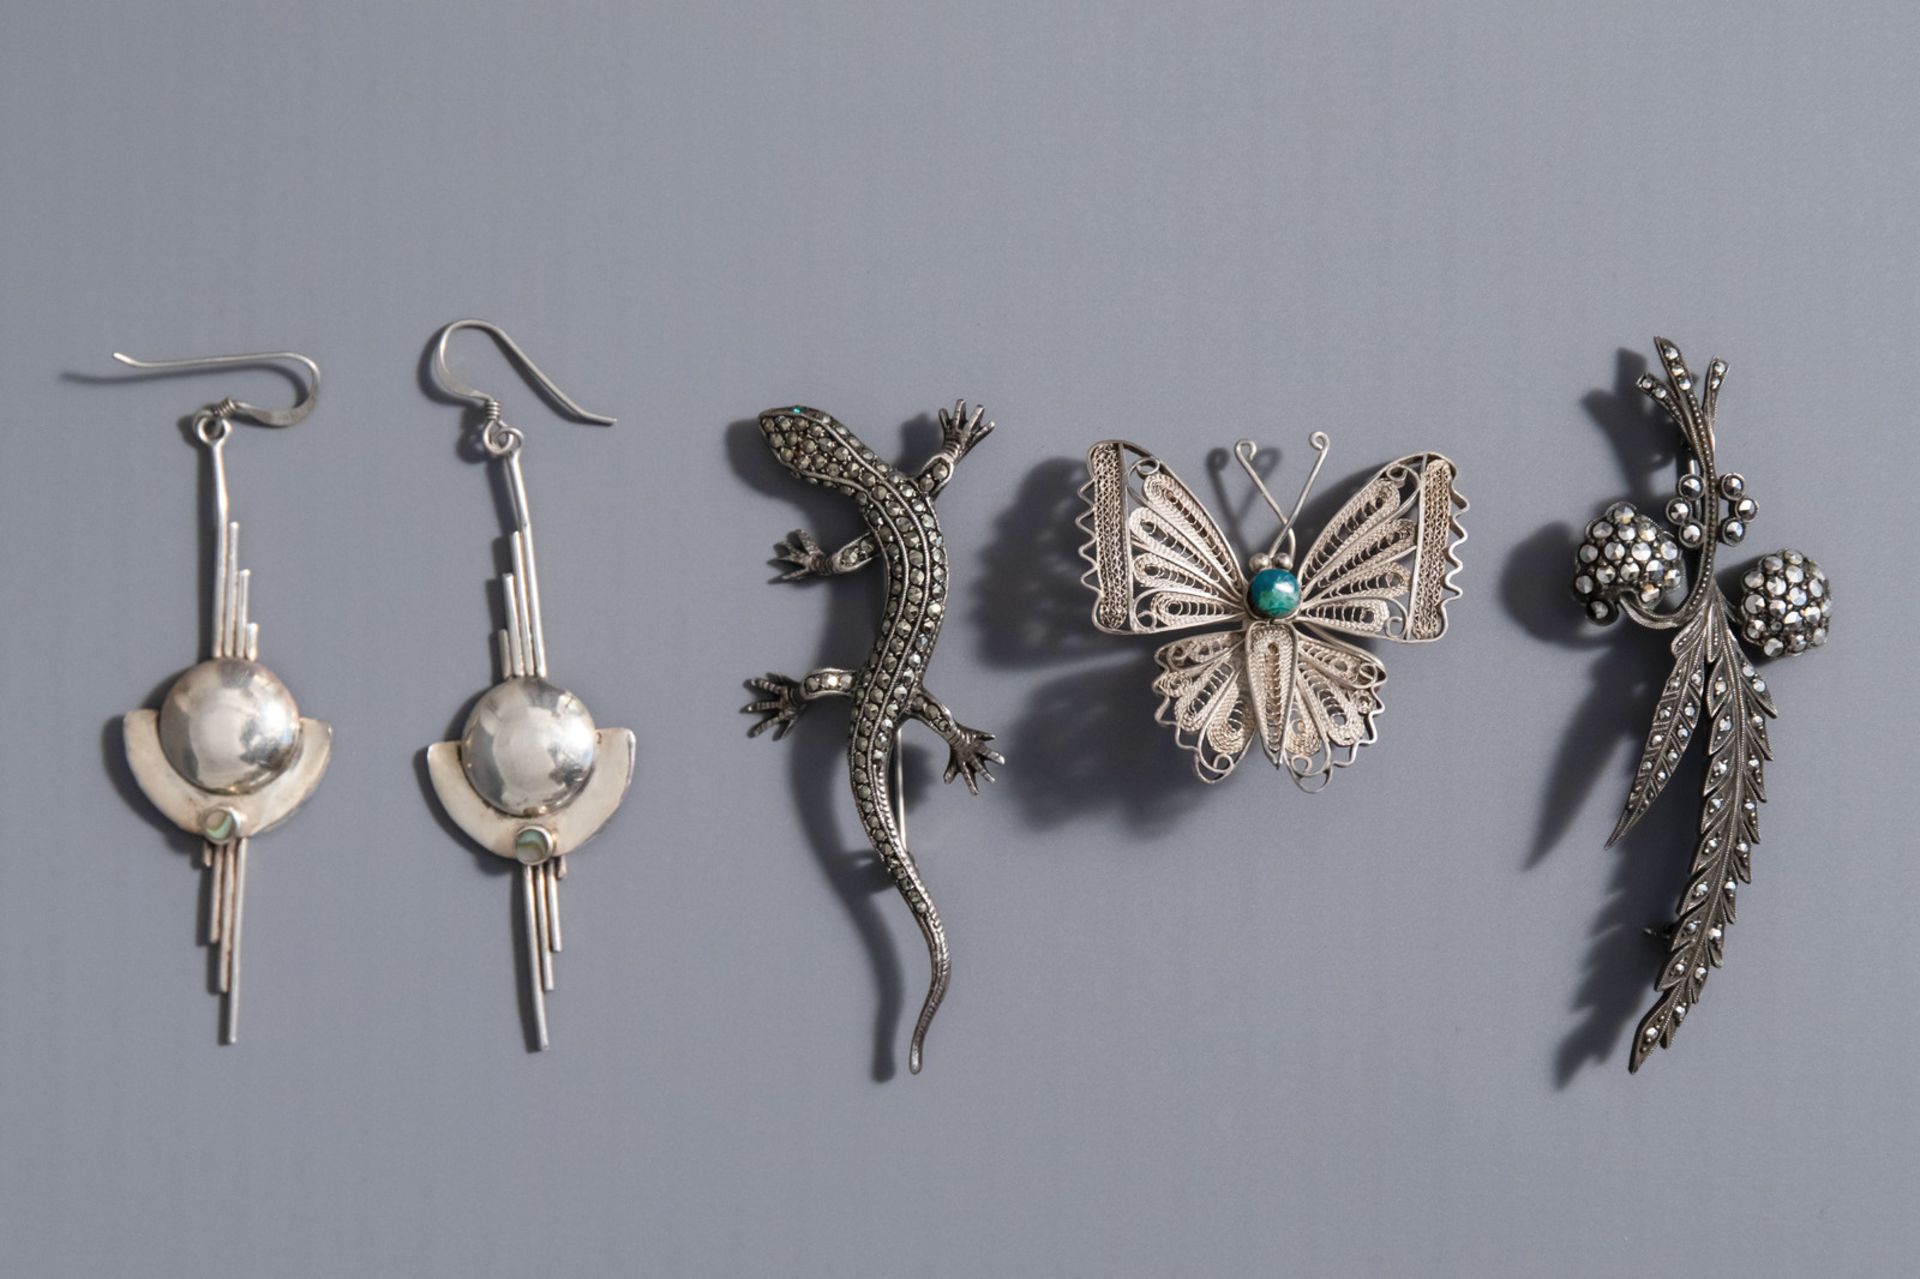 A varied collection of silver jewelery consisting of three brooches and a pair of earrings, 20th C.